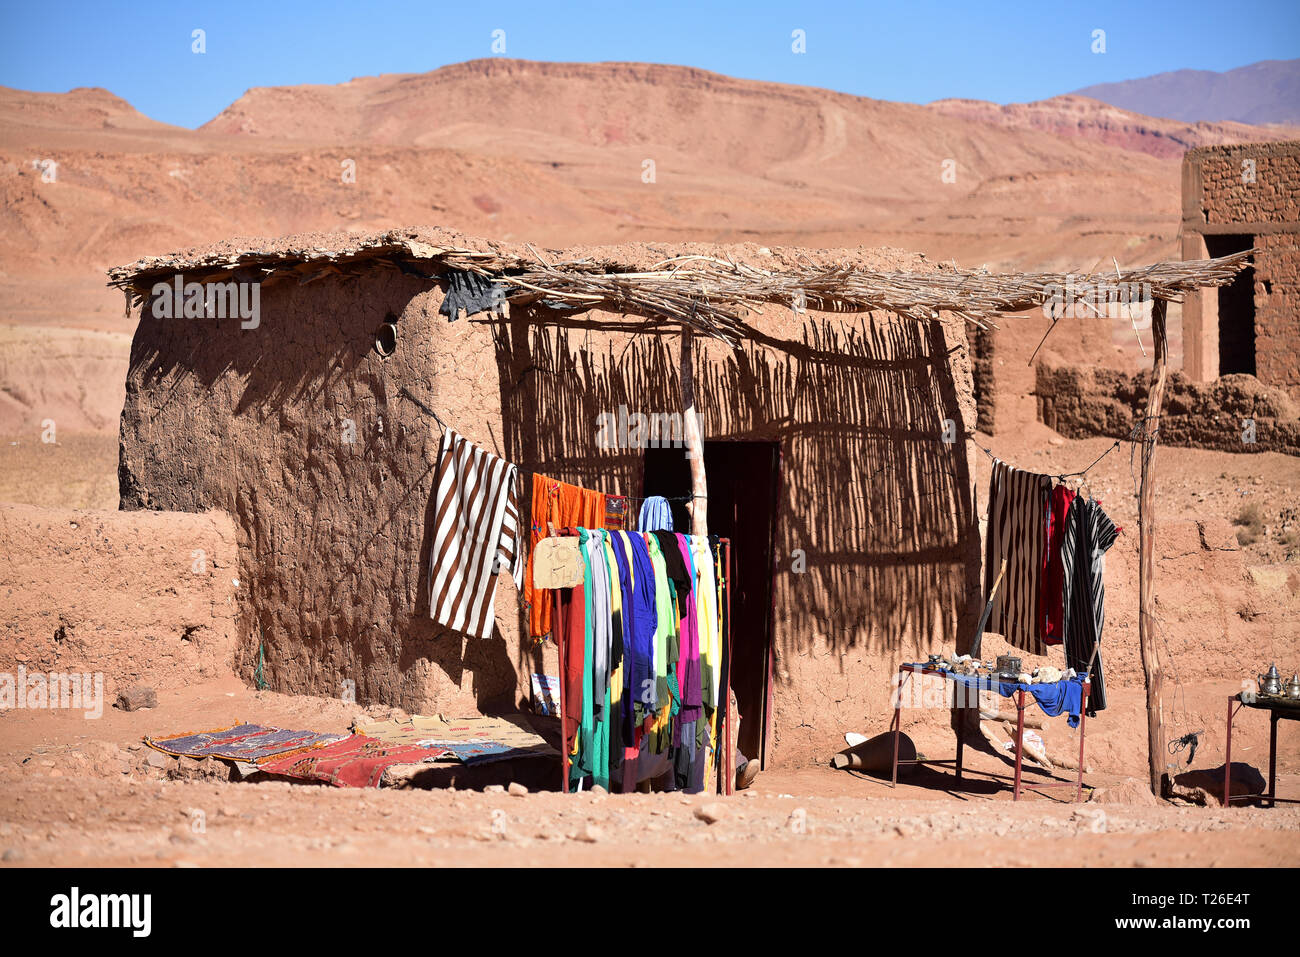 Traditional moroccan hut with colorful clothes hanging outside. Ait Benhaddou, Souss-Massa-Draa, Morocco Stock Photo